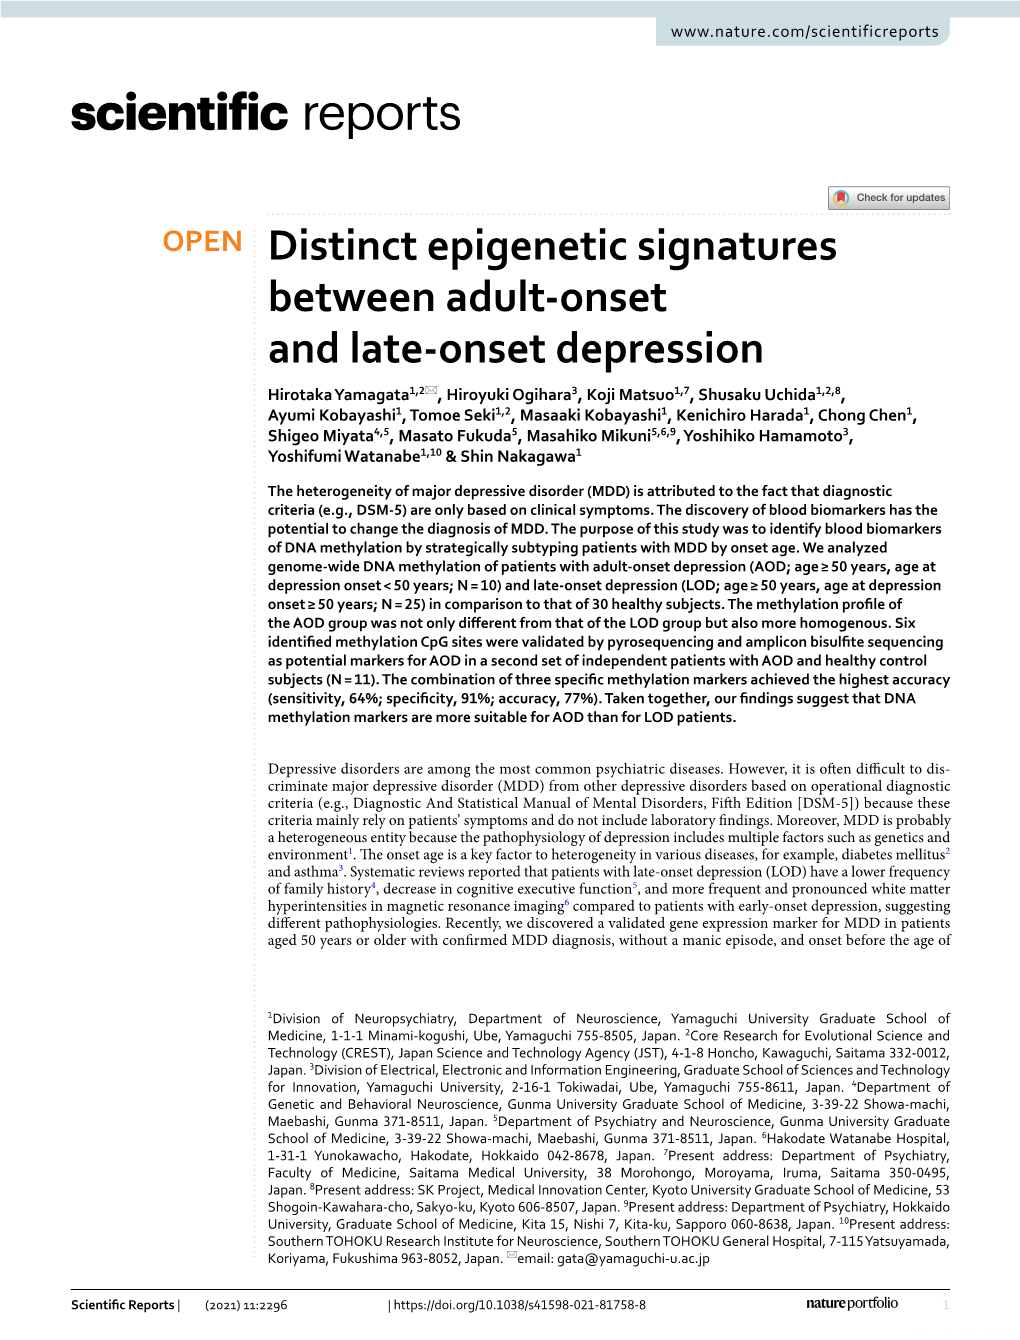 Distinct Epigenetic Signatures Between Adult-Onset and Late-Onset